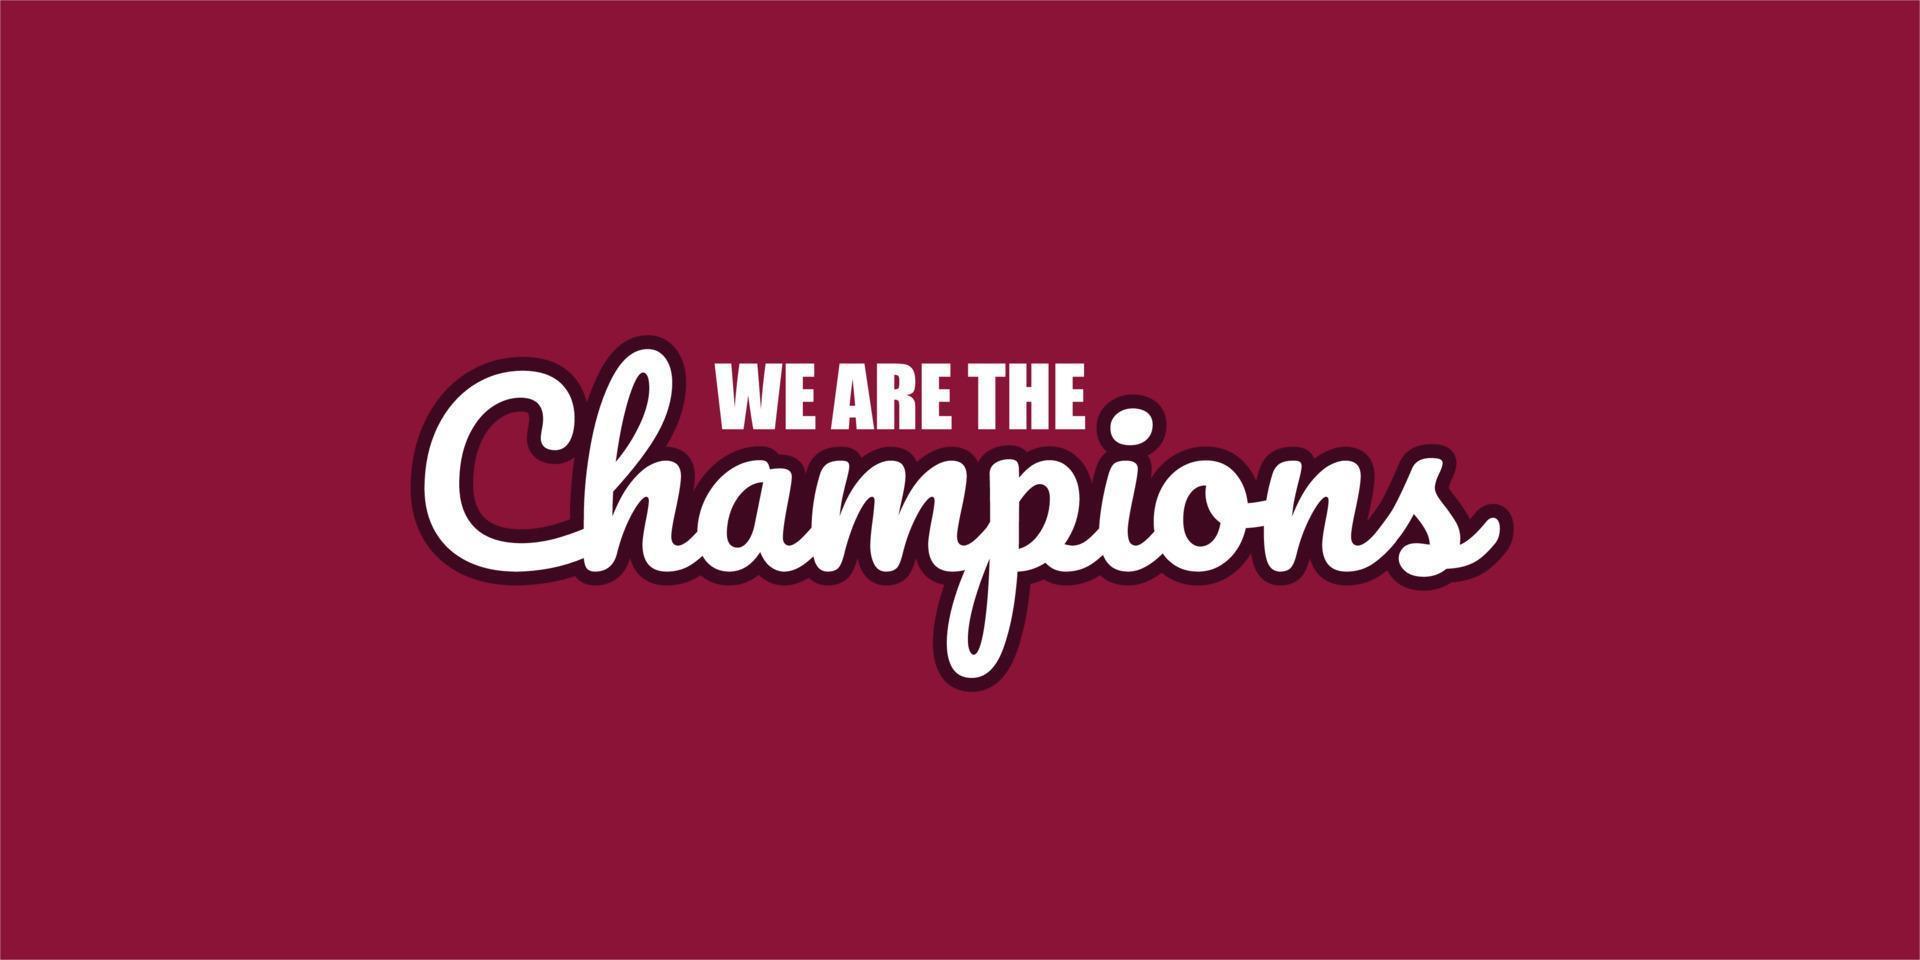 we are the champion typography design tee for t shirt,vector illustration vector